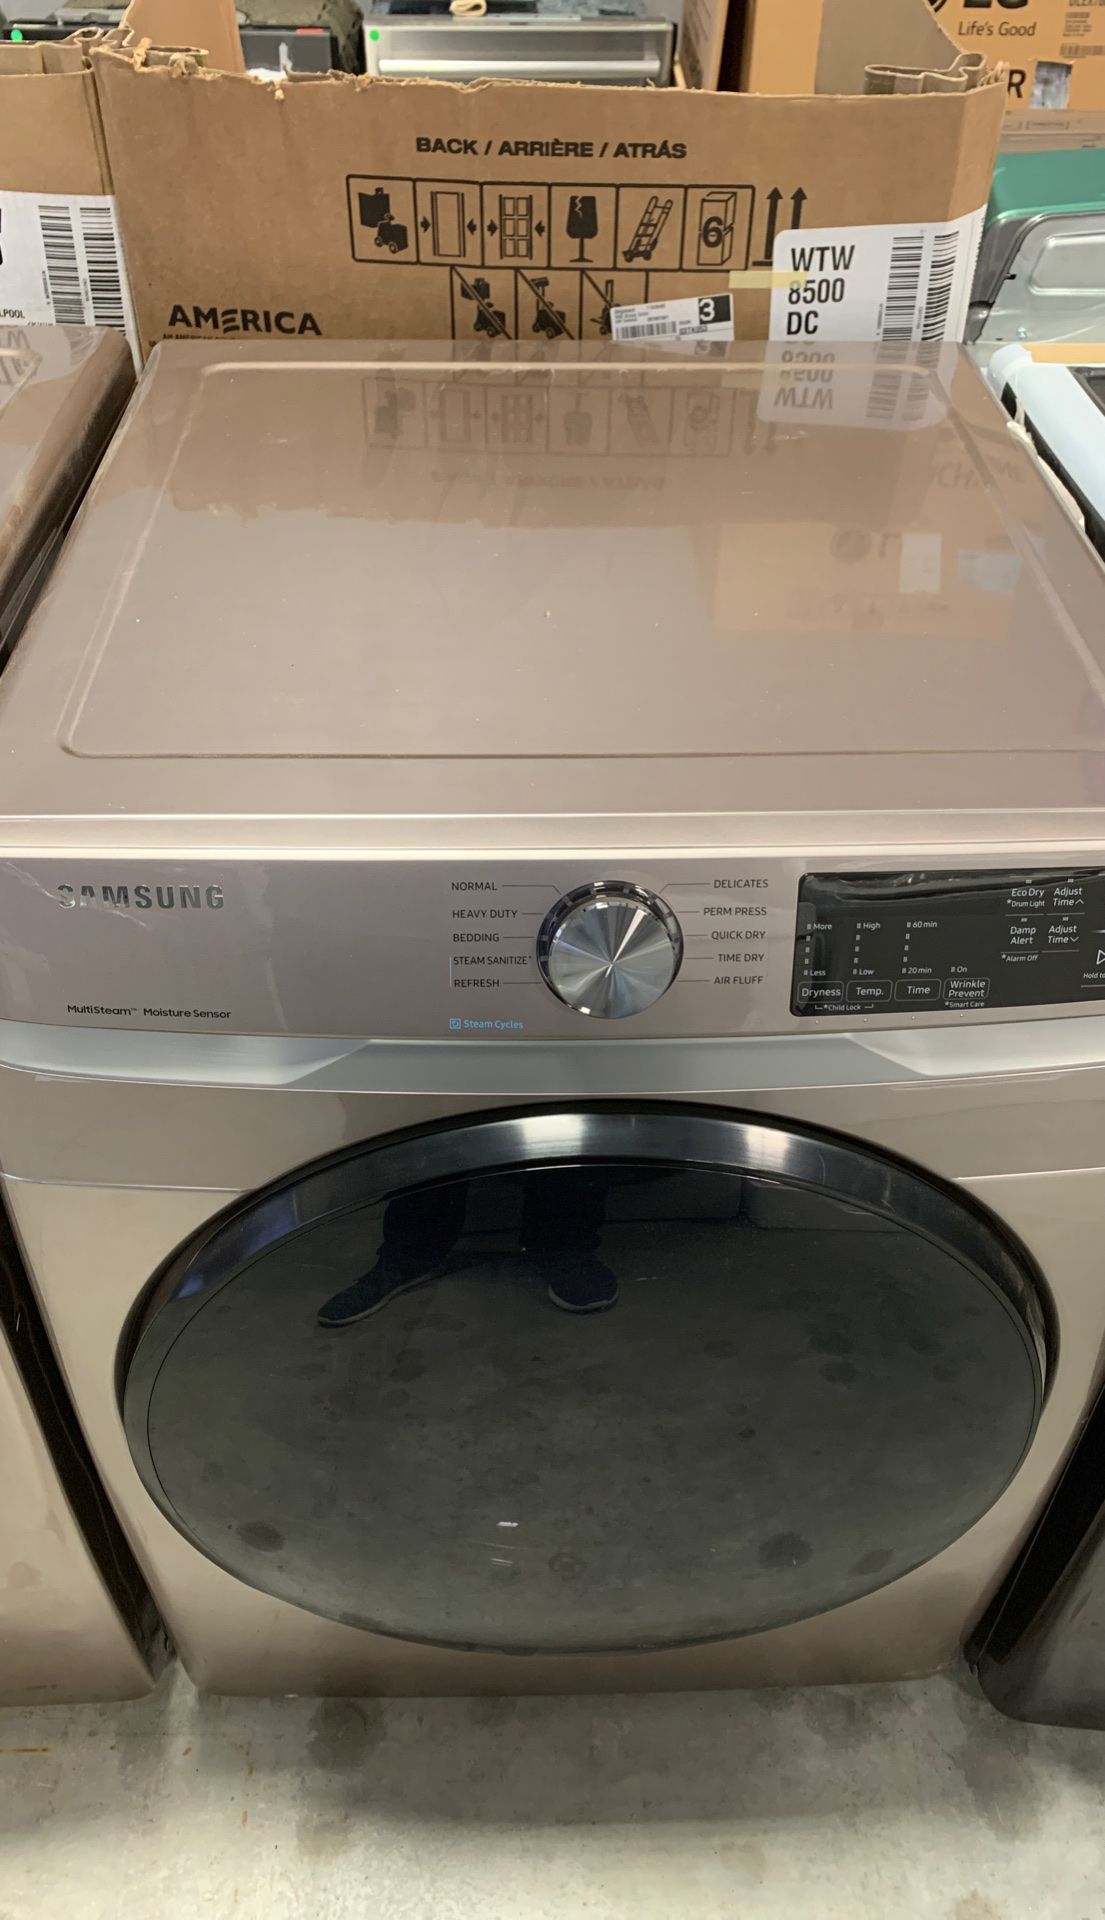 🔥🔥🔥BLOWOUT SALE🔥🔥🔥 ❤️❤️❤️BRAND NEW - SCRATCH & DENT APPLIANCES & FURNITURE ❤️❤️❤️OPEN BOX-NEVER USED❤️❤️❤️ 💥💥💥many to choose from💥💥💥 Take home 🏡 with